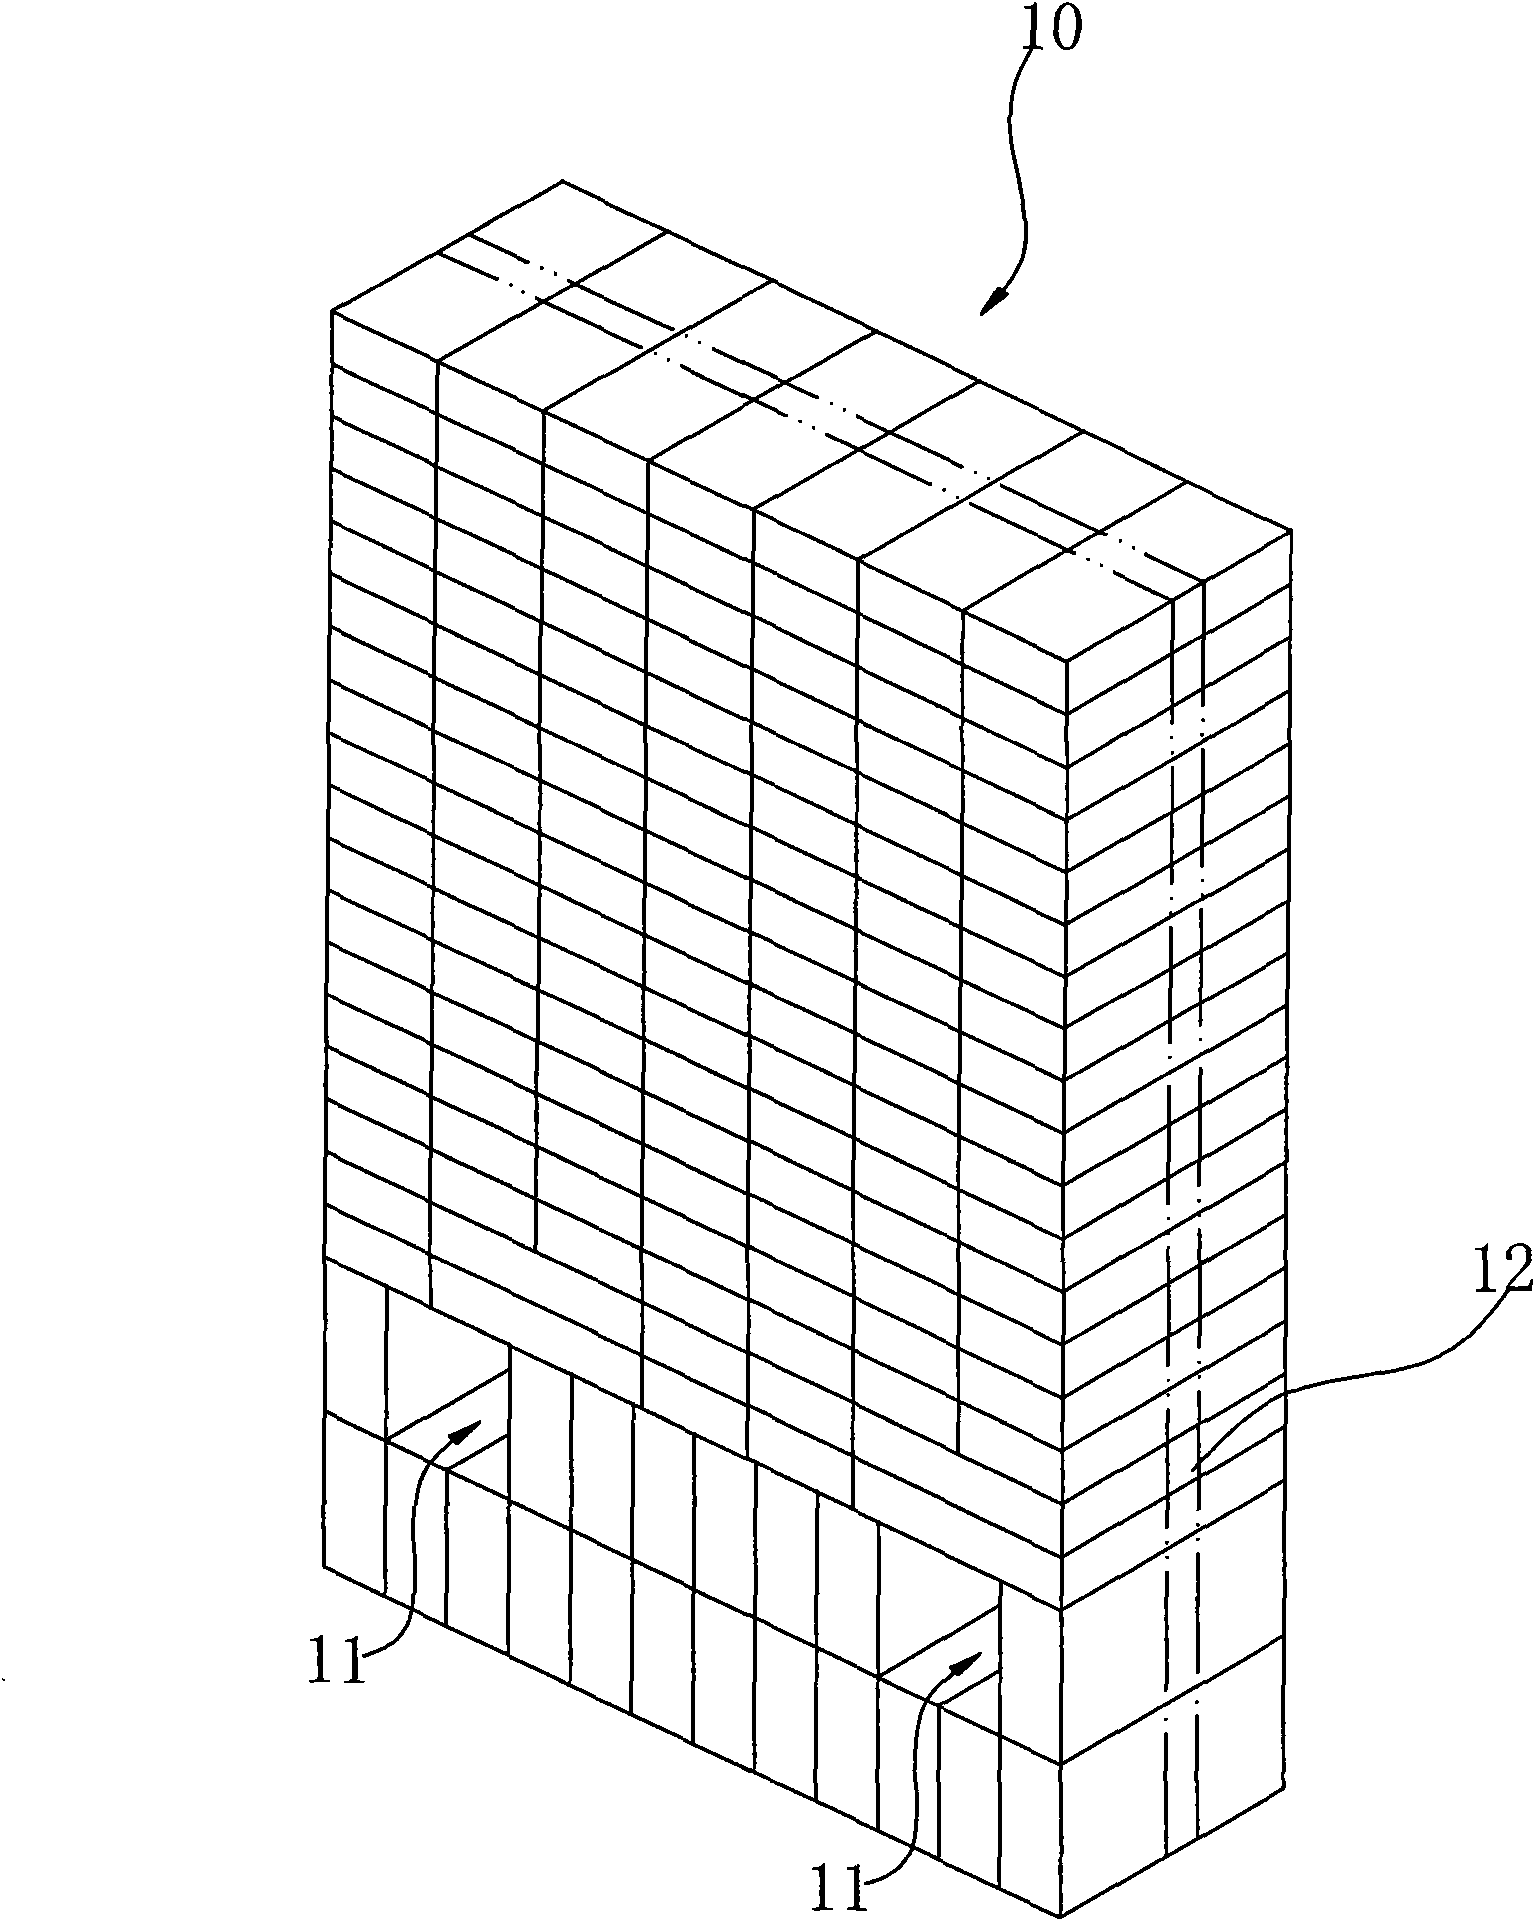 Device and method for automatically stacking and packaging bricks